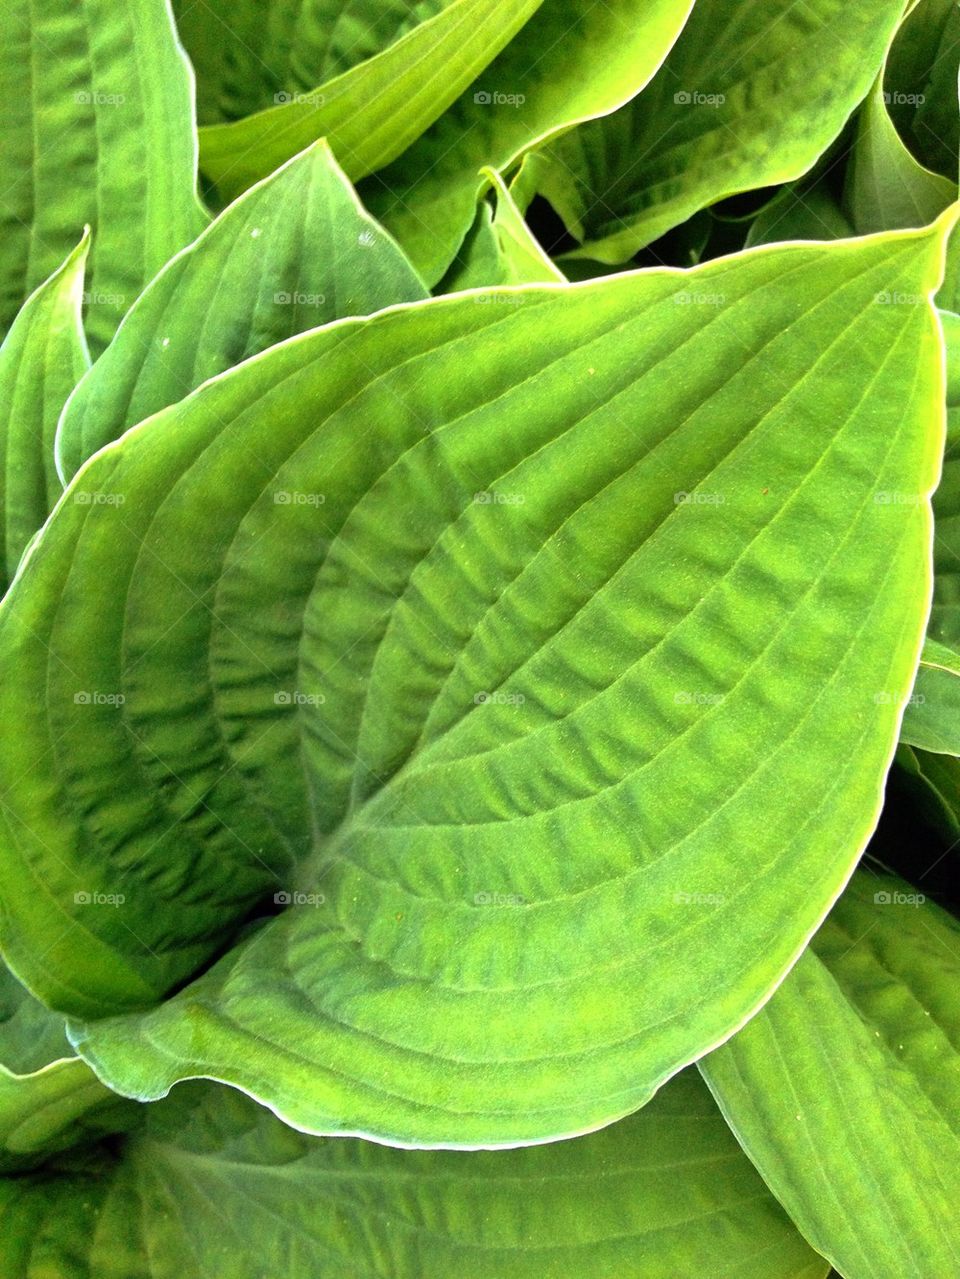 Extreme close-up of green leaf